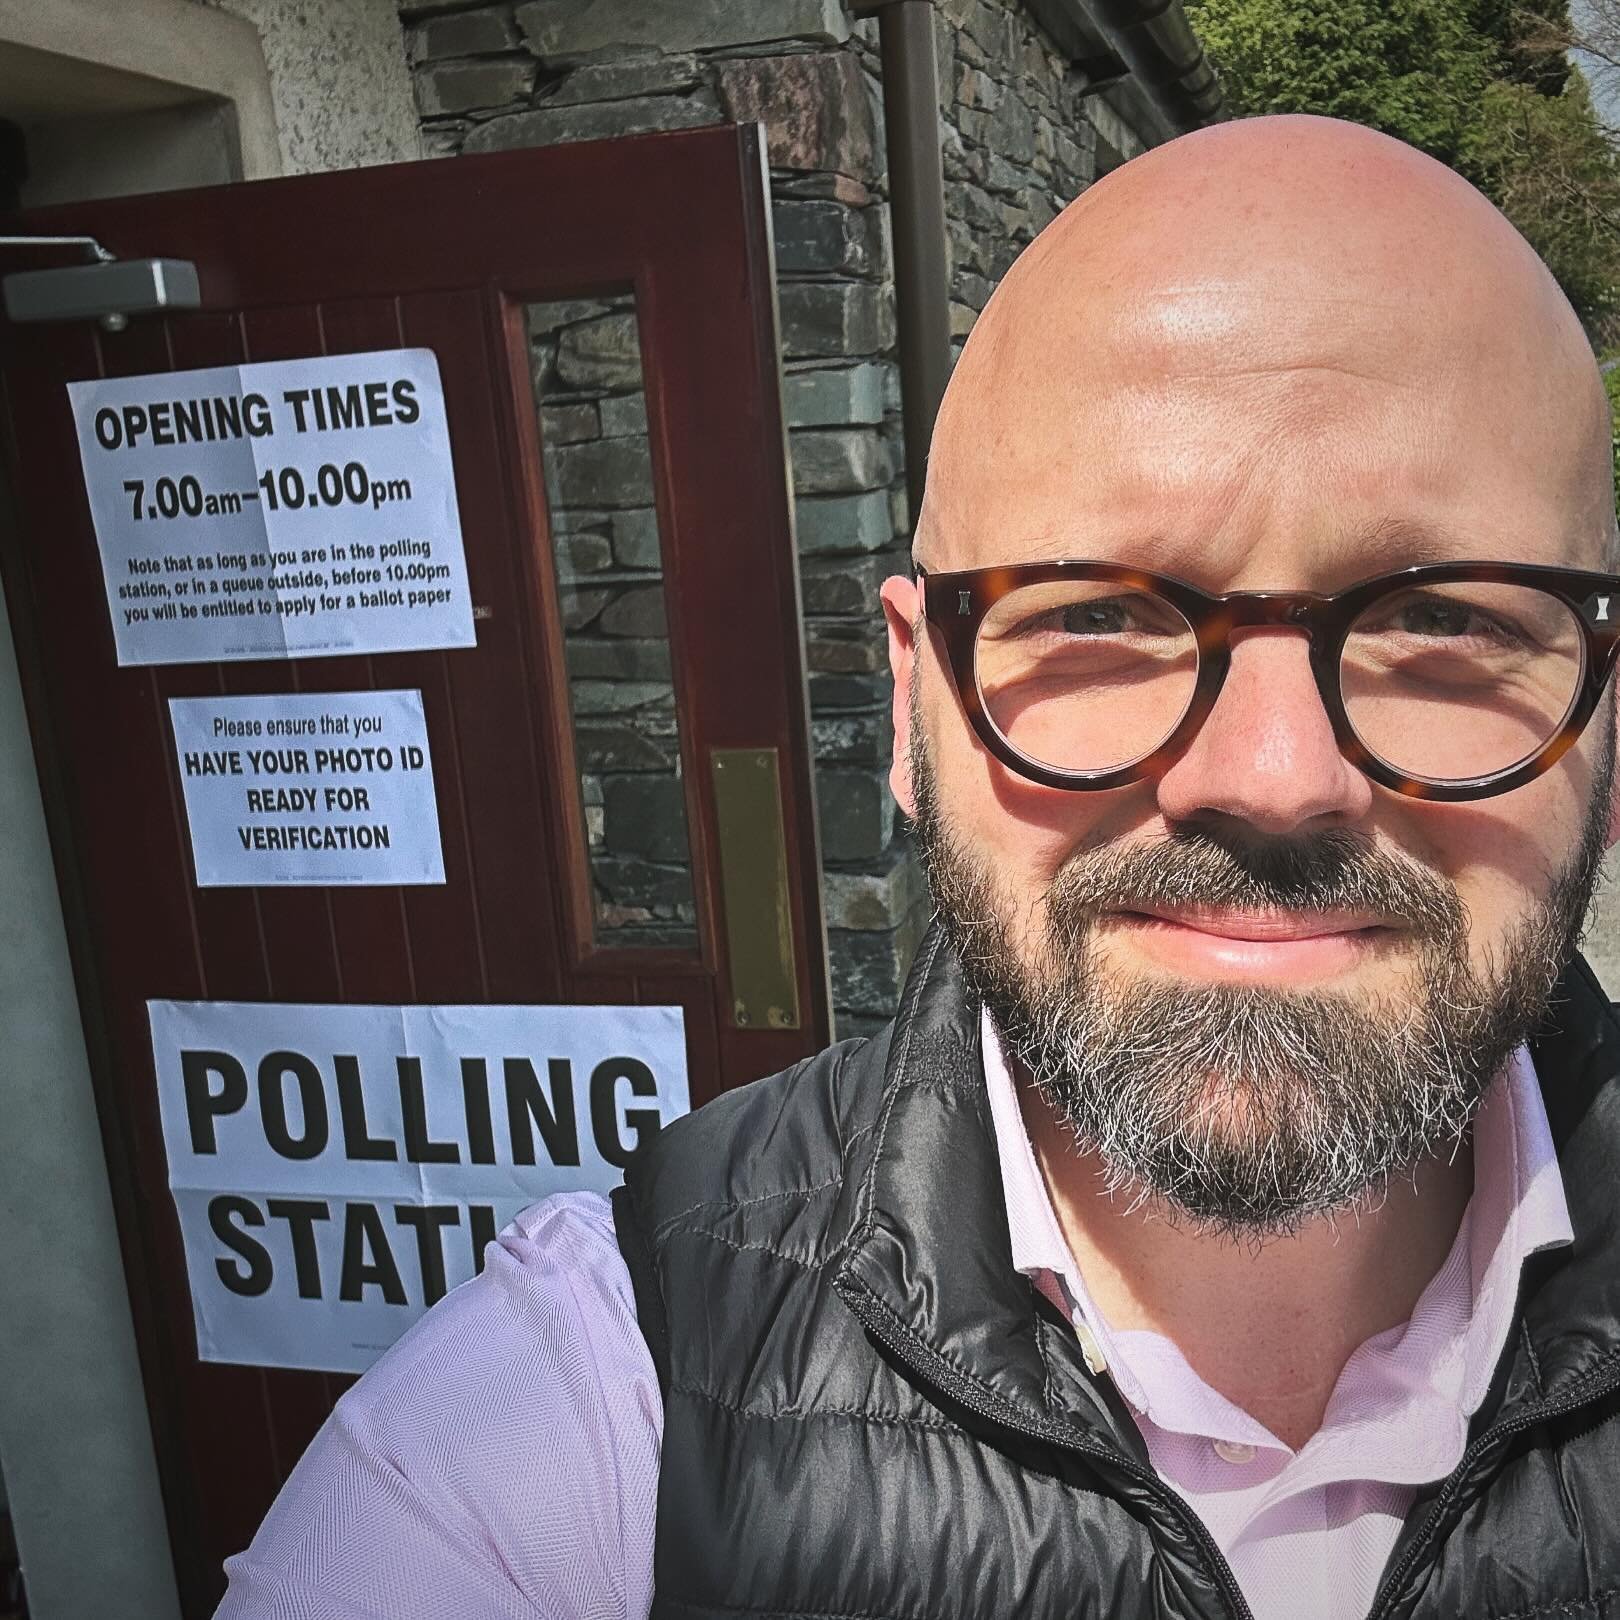 It&rsquo;s a gloriously sunny day and polls will remain open until 10pm. 

No matter who you vote for, please do take the time to vote. In Barrow &amp; Furness we have Ulverston Town Council and Police, Fire &amp; Crime Commissioner elections. 

I wa